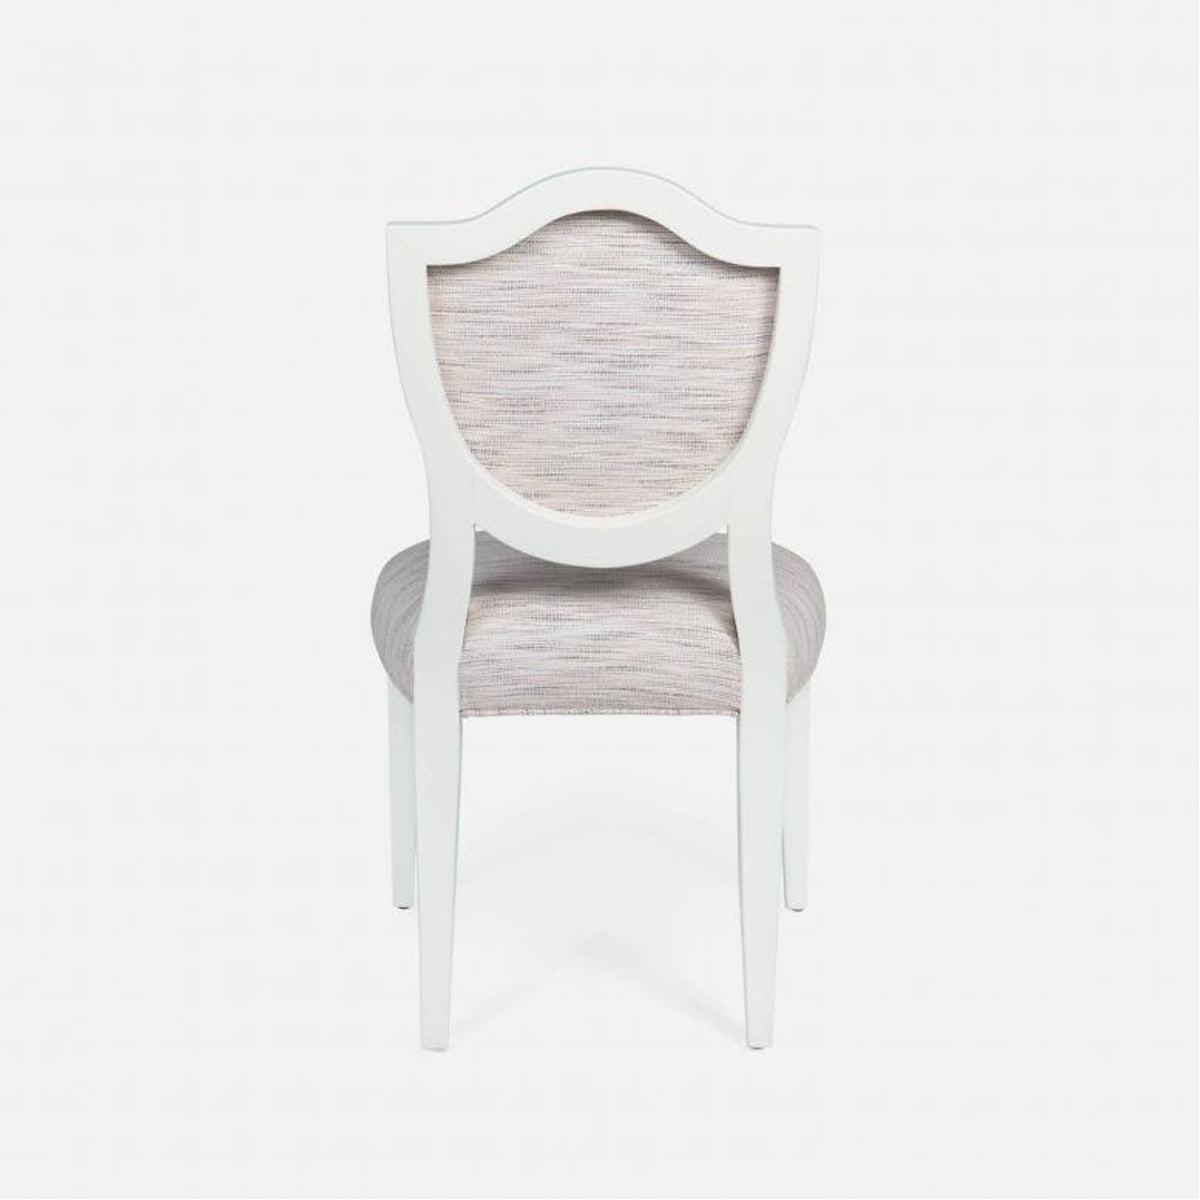 Made Goods Micah Upholstered Medallion Dining Chair in Lambro Boucle